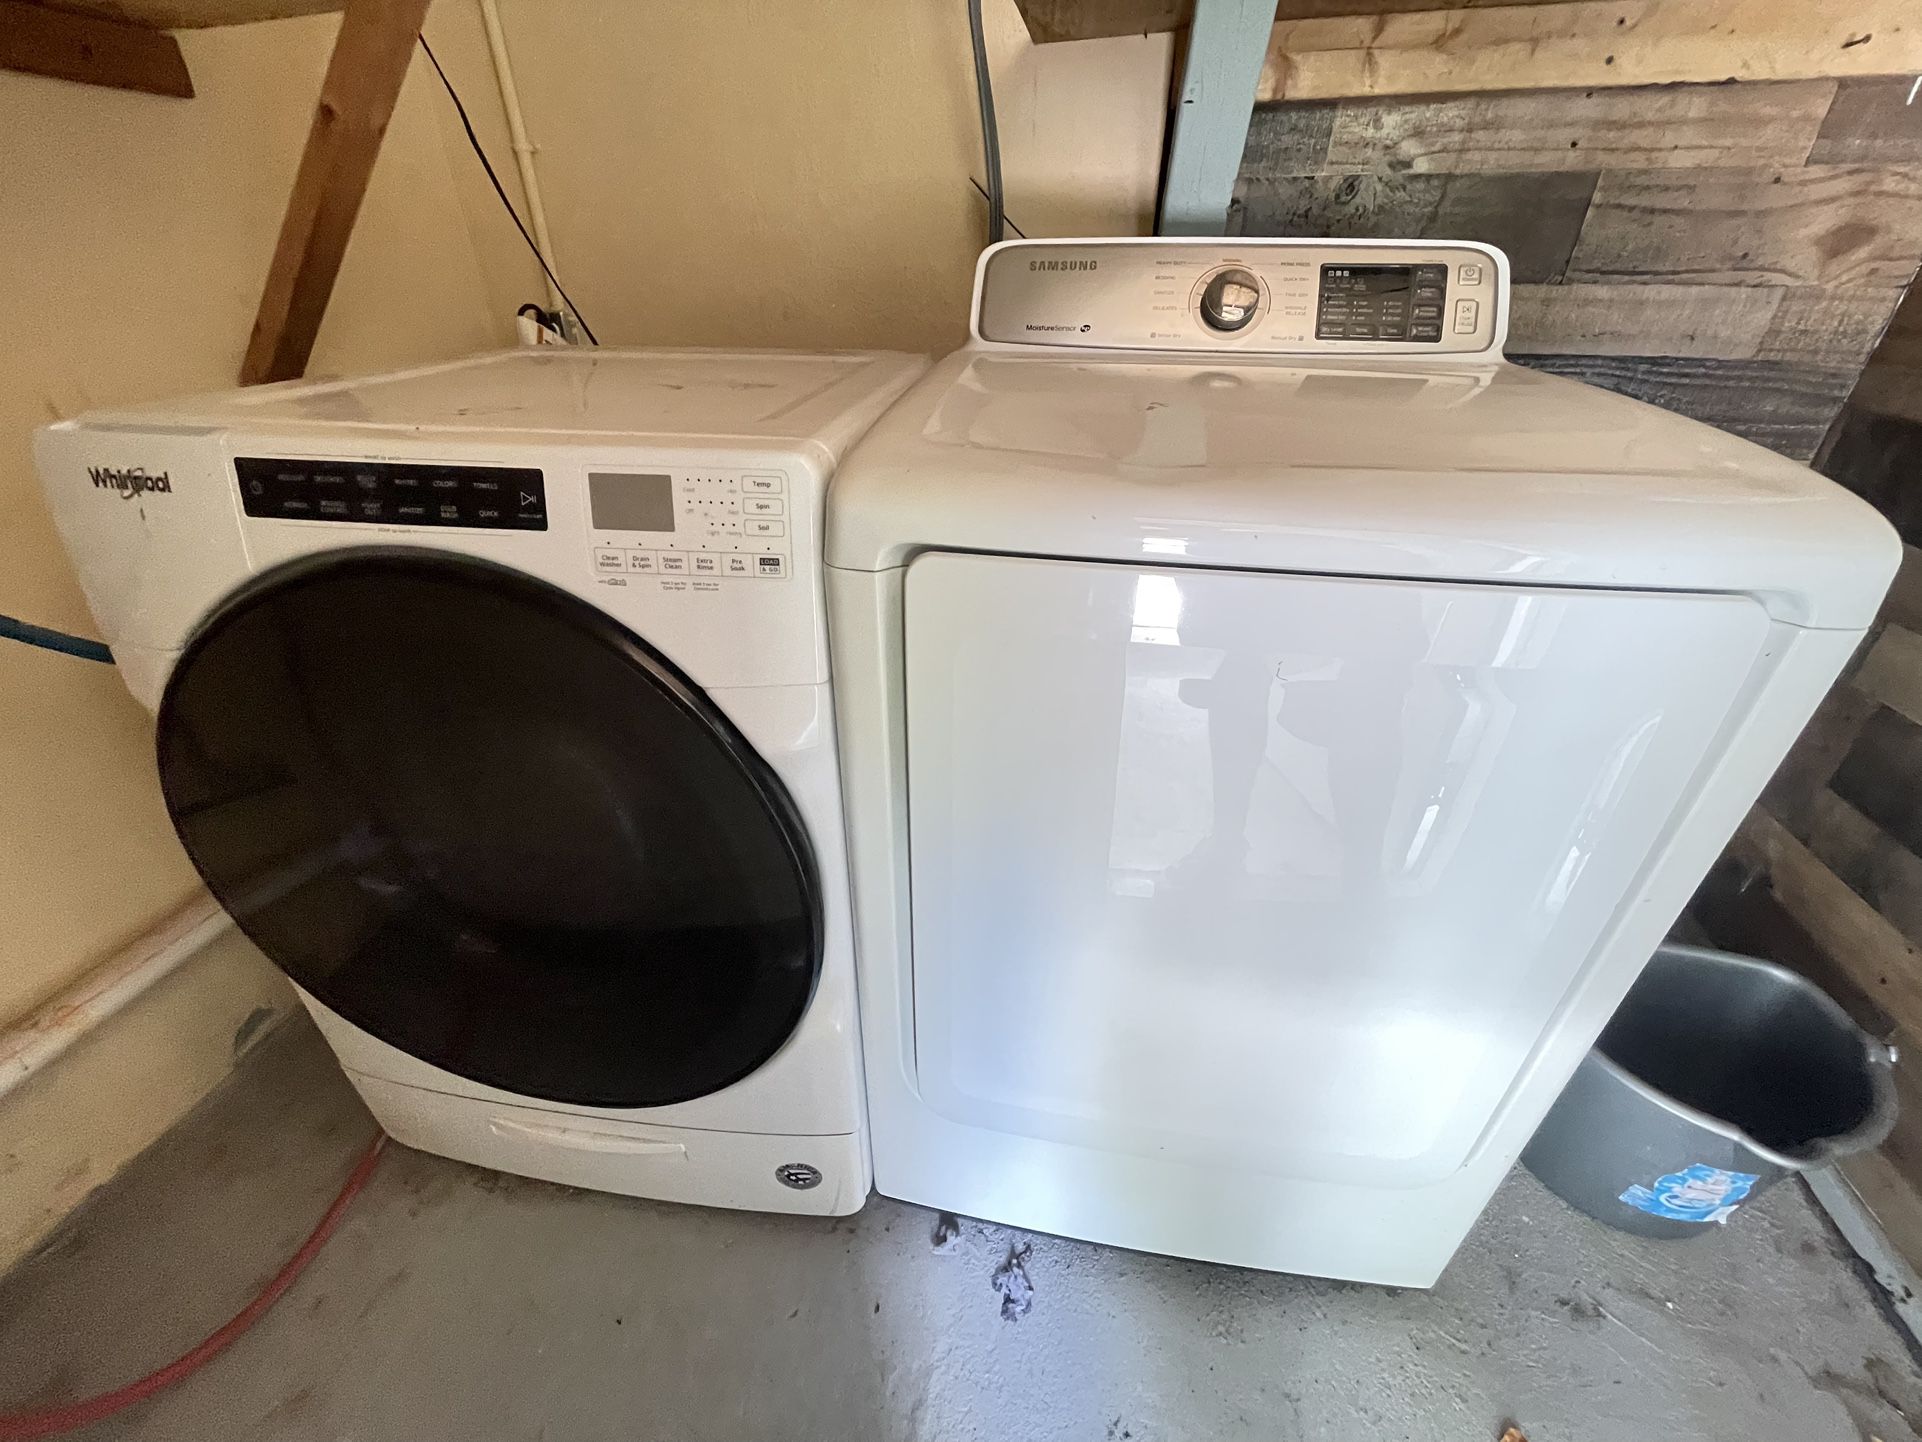 Washer And Dryer (Whirlpool,Samsung)